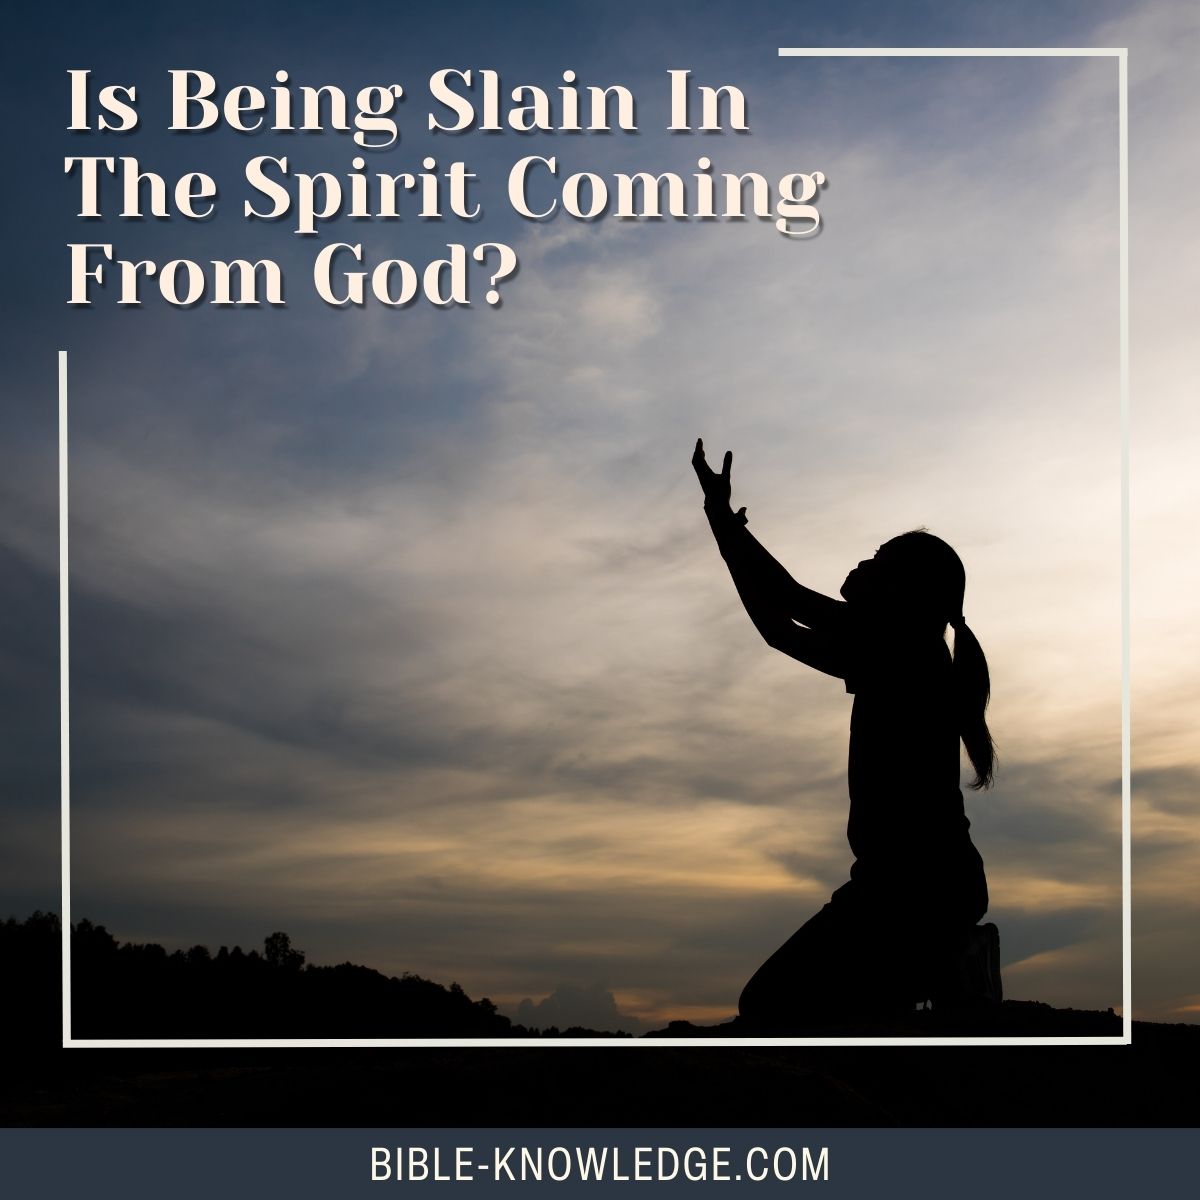 Is Being Slain In The Spirit Coming From God?